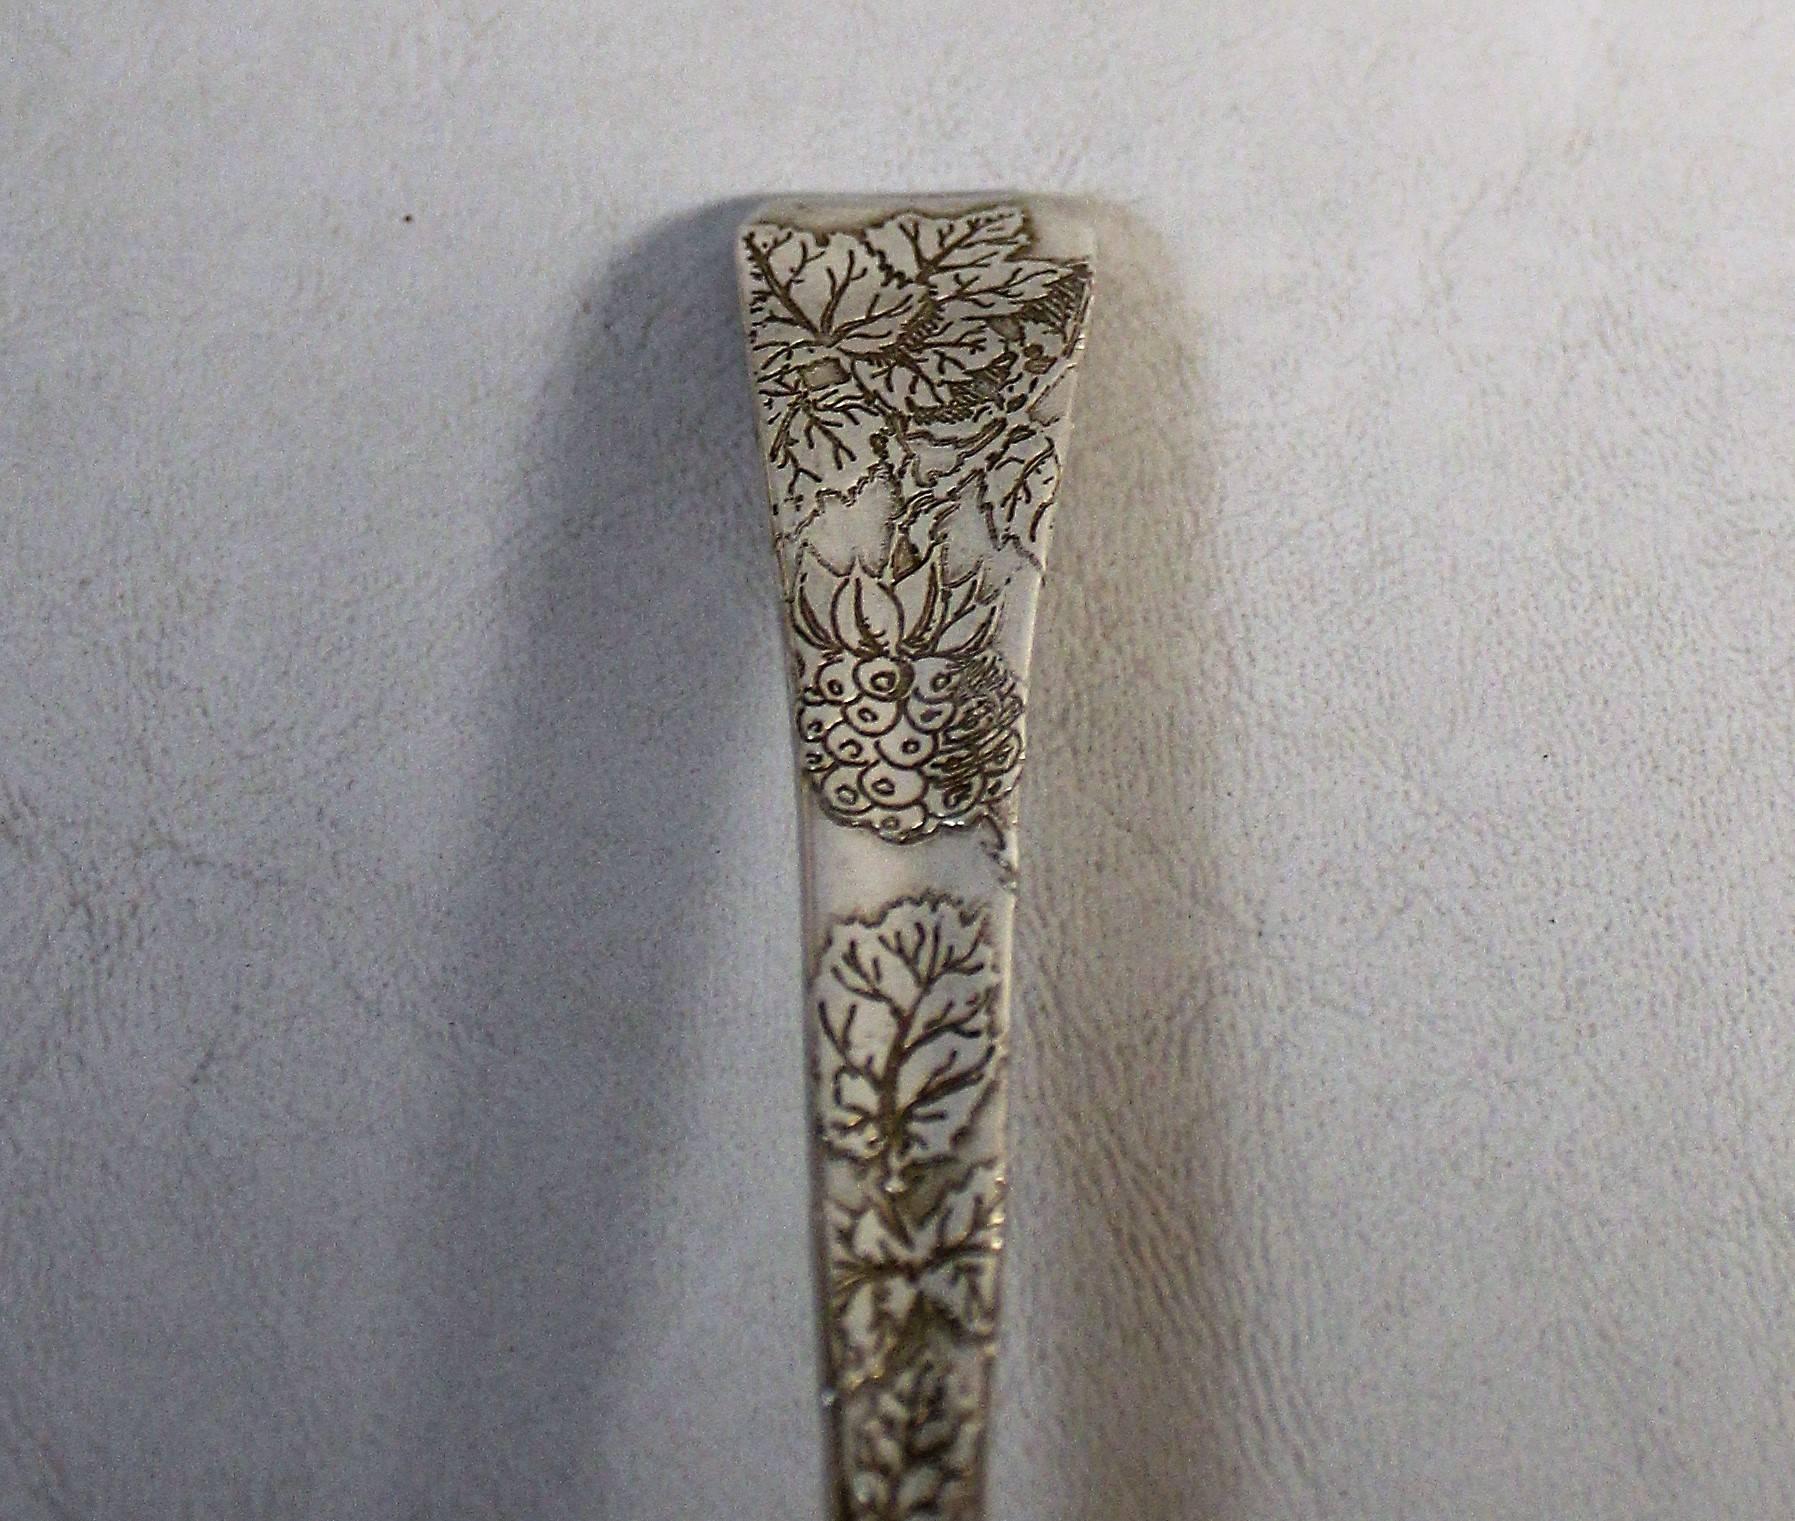 19th Century Tiffany 'Lap-Over-Edge' Spoons Designed by Charles T. Grosjean